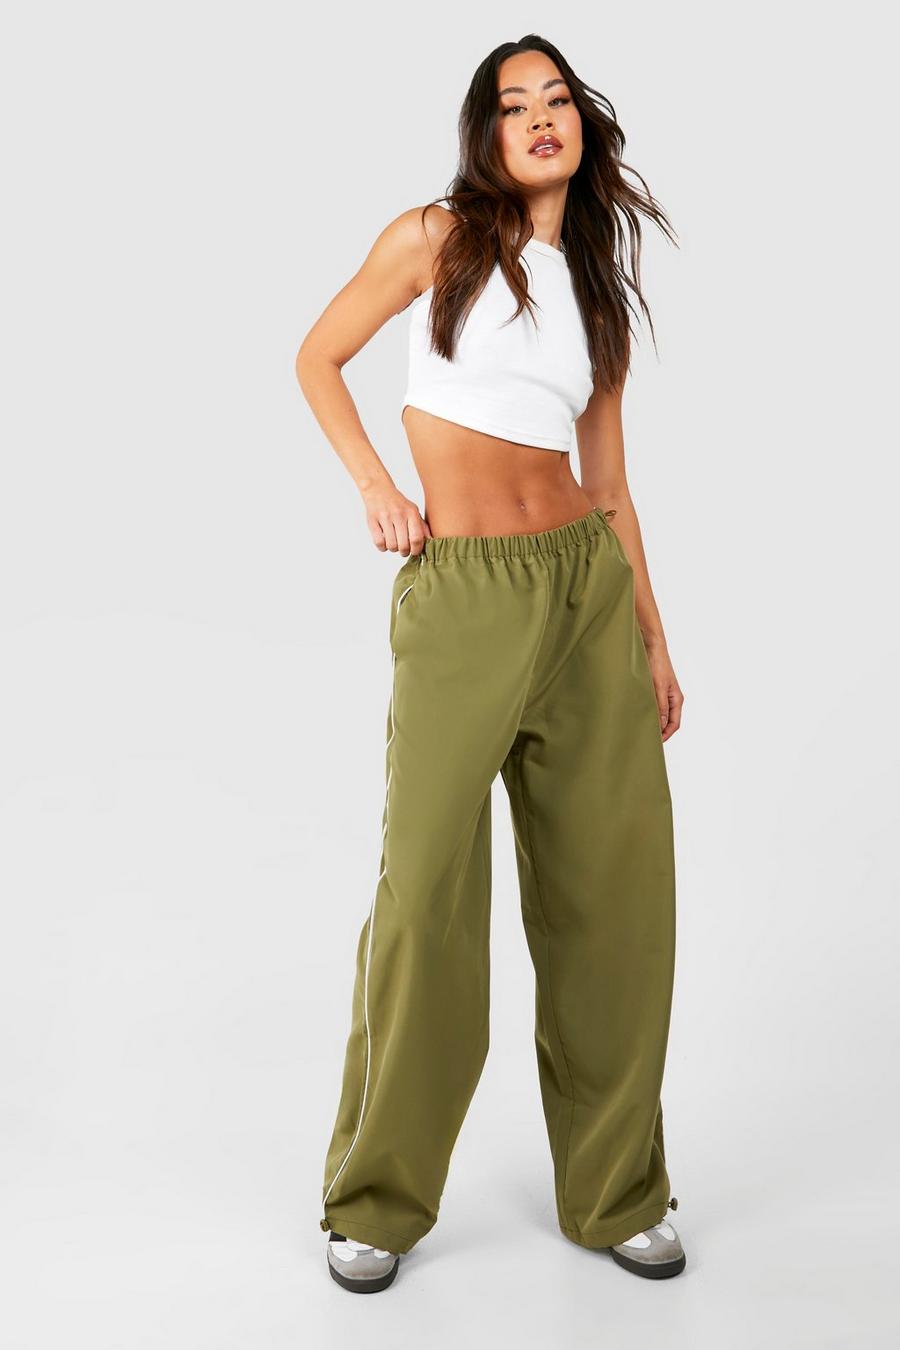 Khaki Tall Woven Elastic Waist Side Piping Joggers image number 1